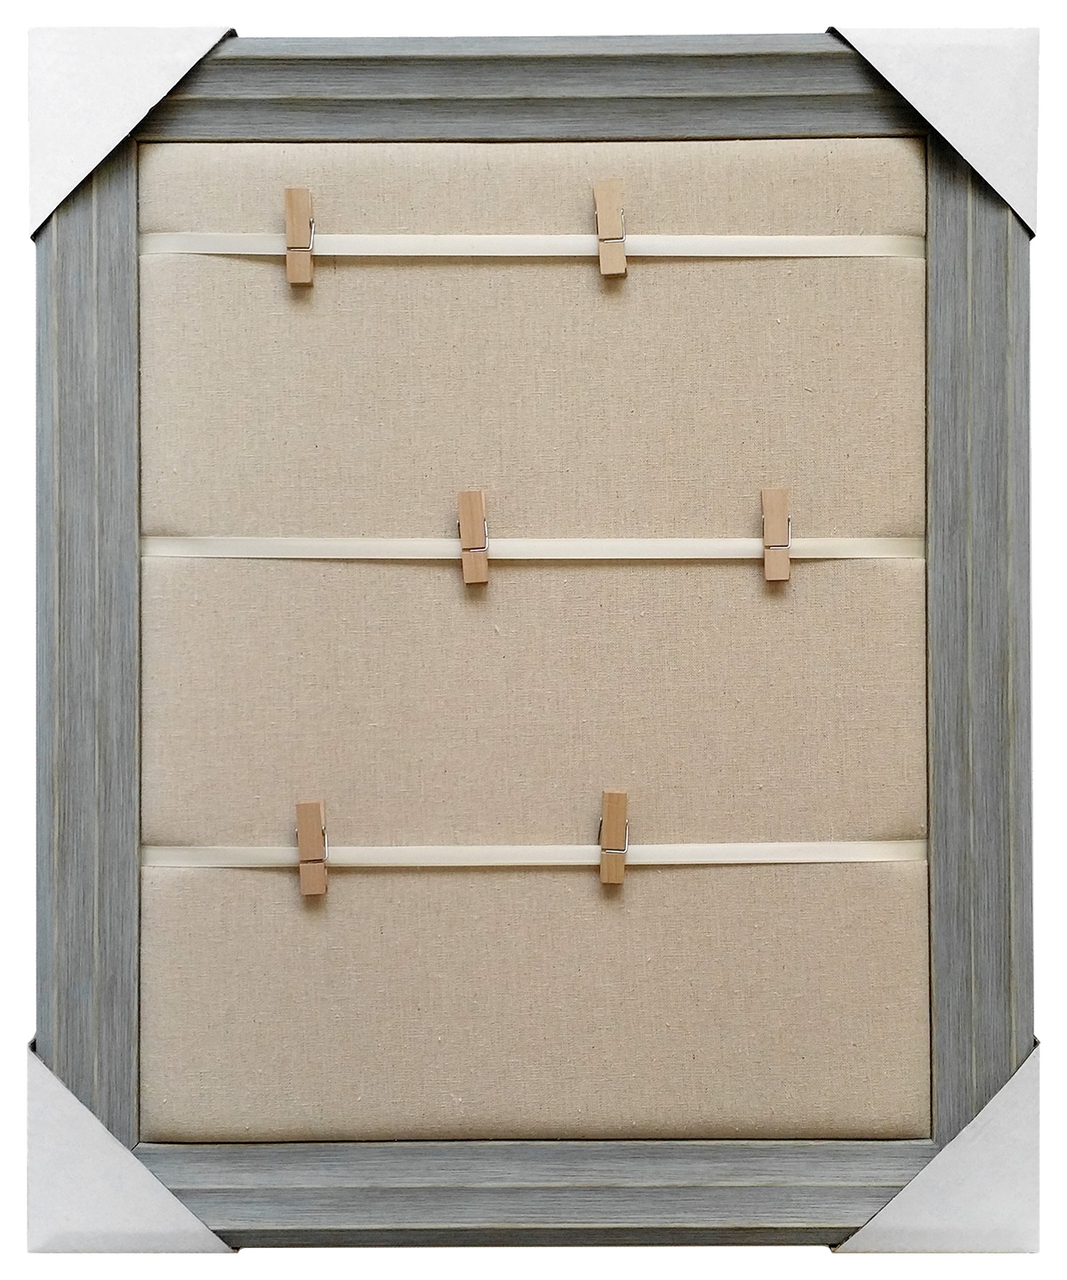 19x23 Framed Memo Board, 3 stripe ribbons with 6 clothespins over plain fabric, Blue frame